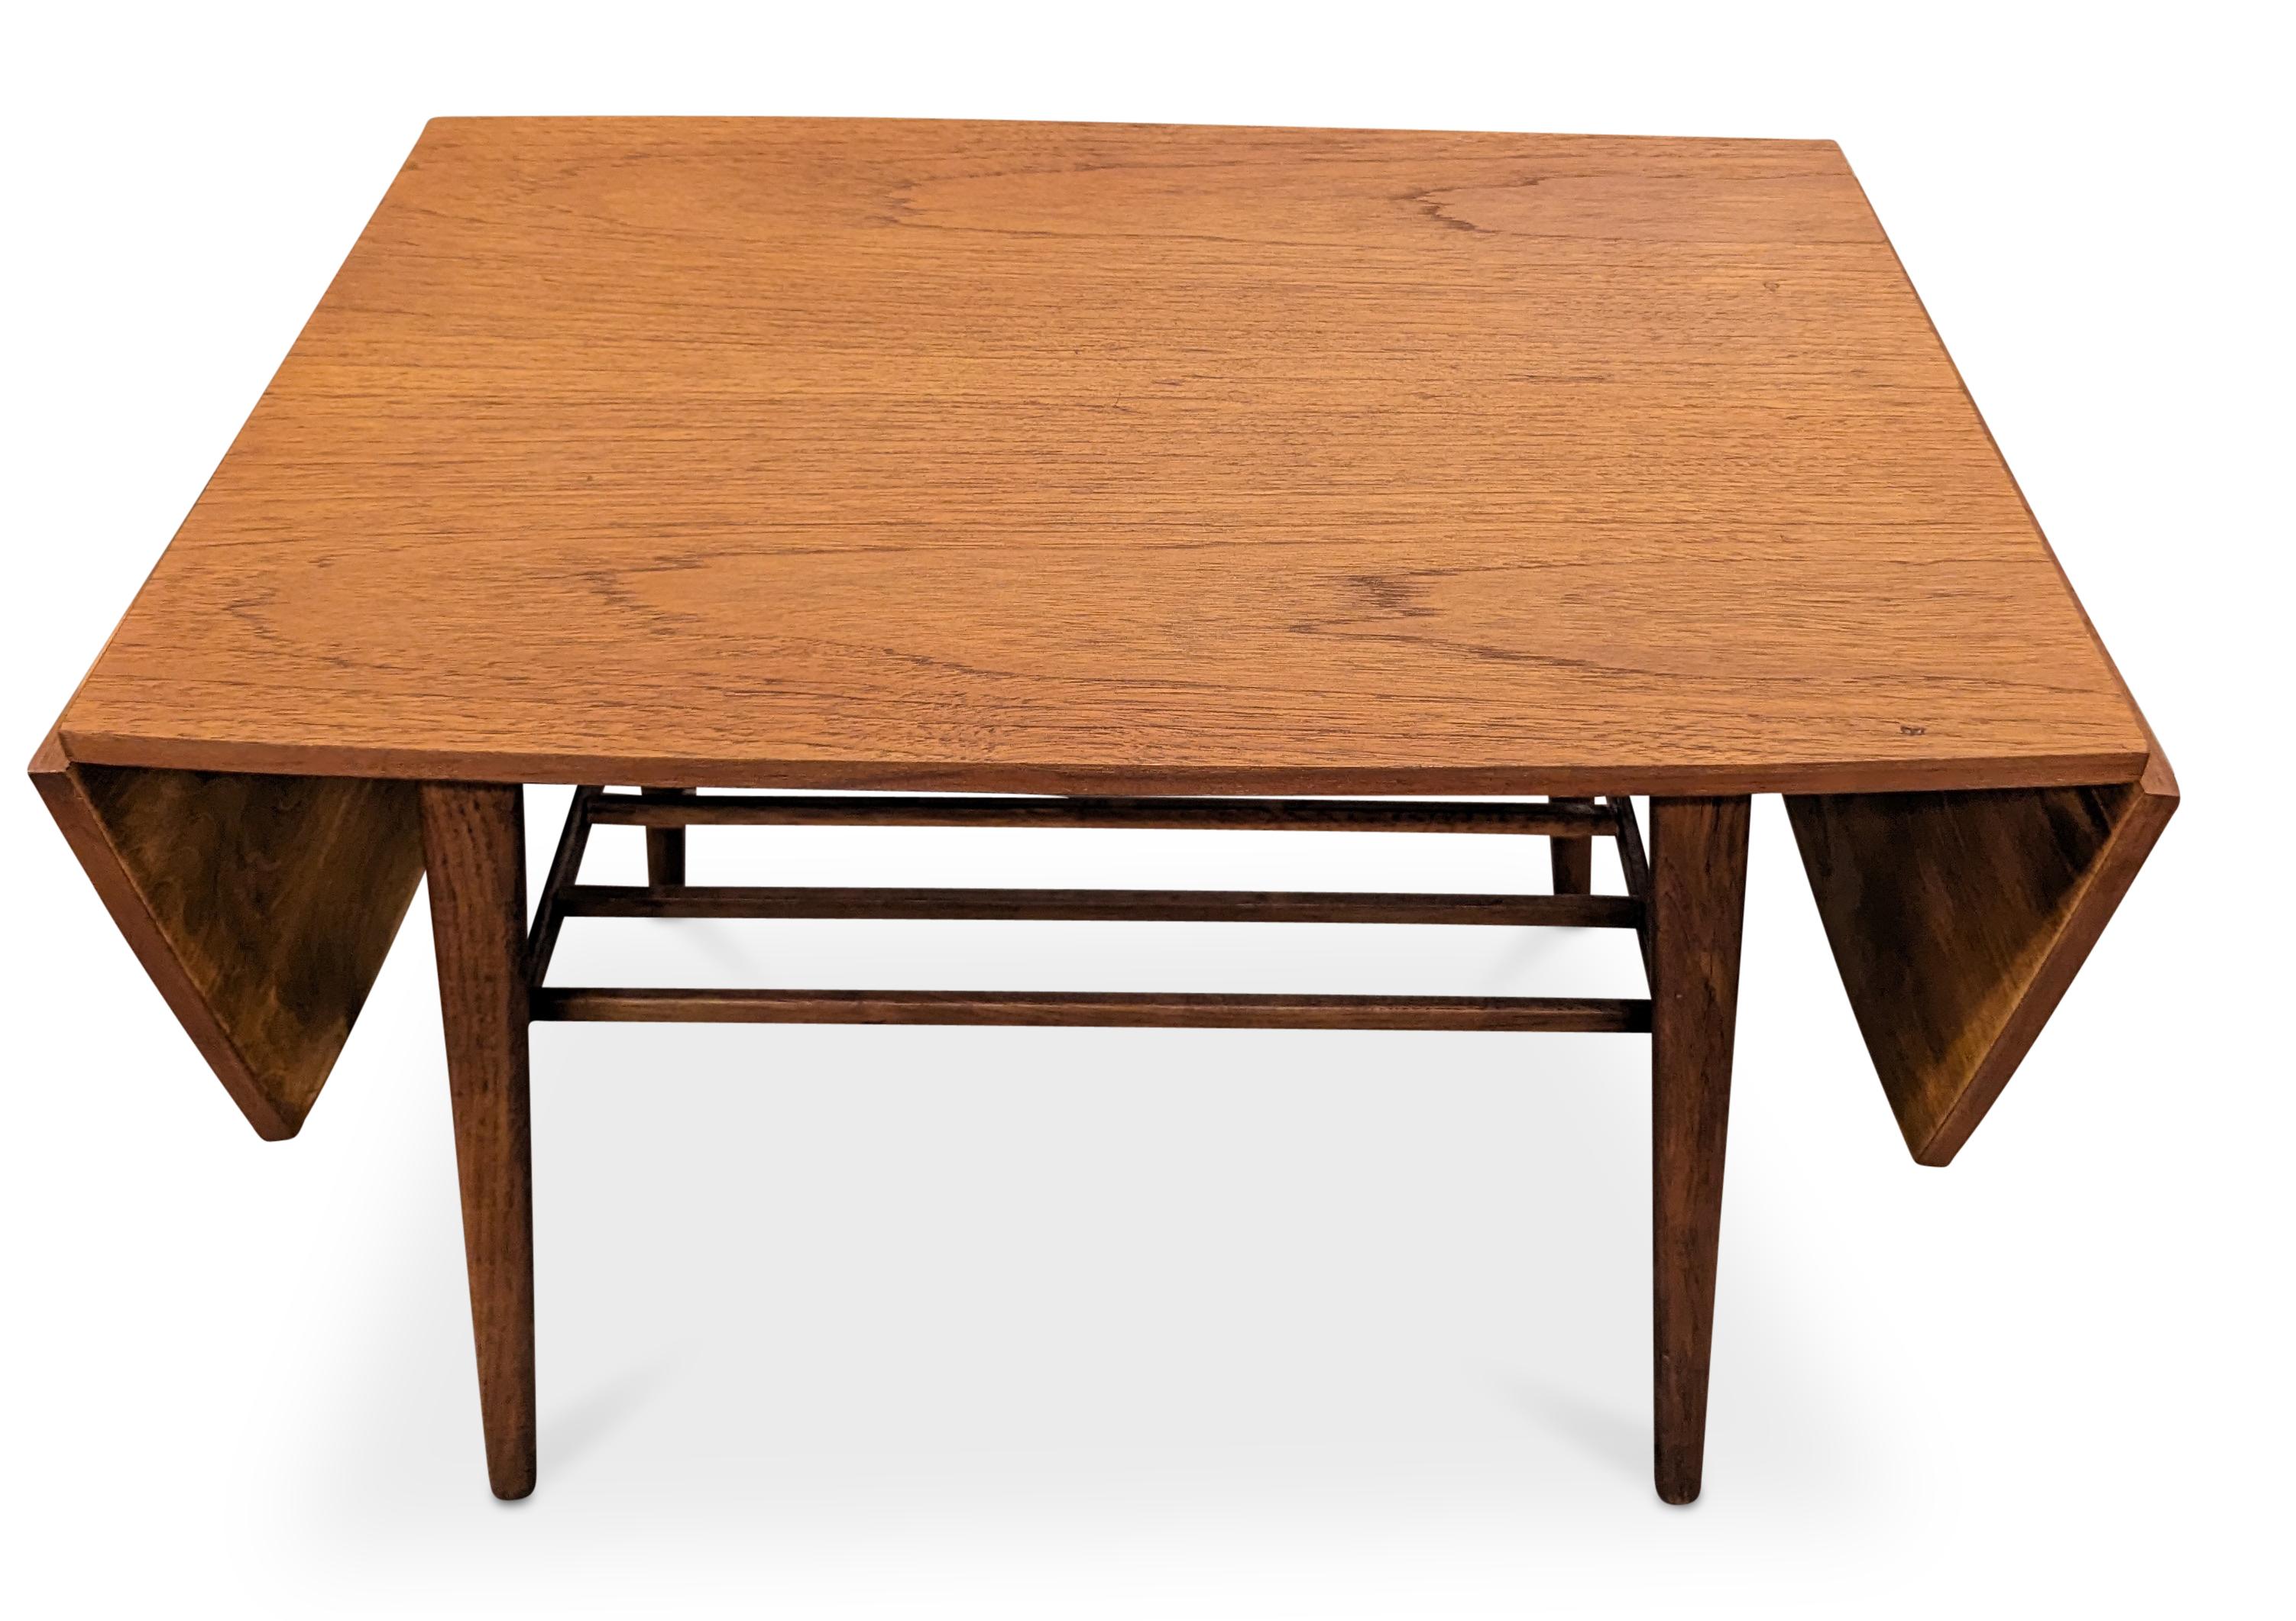 Vintage Danish Mid Century Teak Side / Coffee Table - 022416 In Good Condition For Sale In Brooklyn, NY